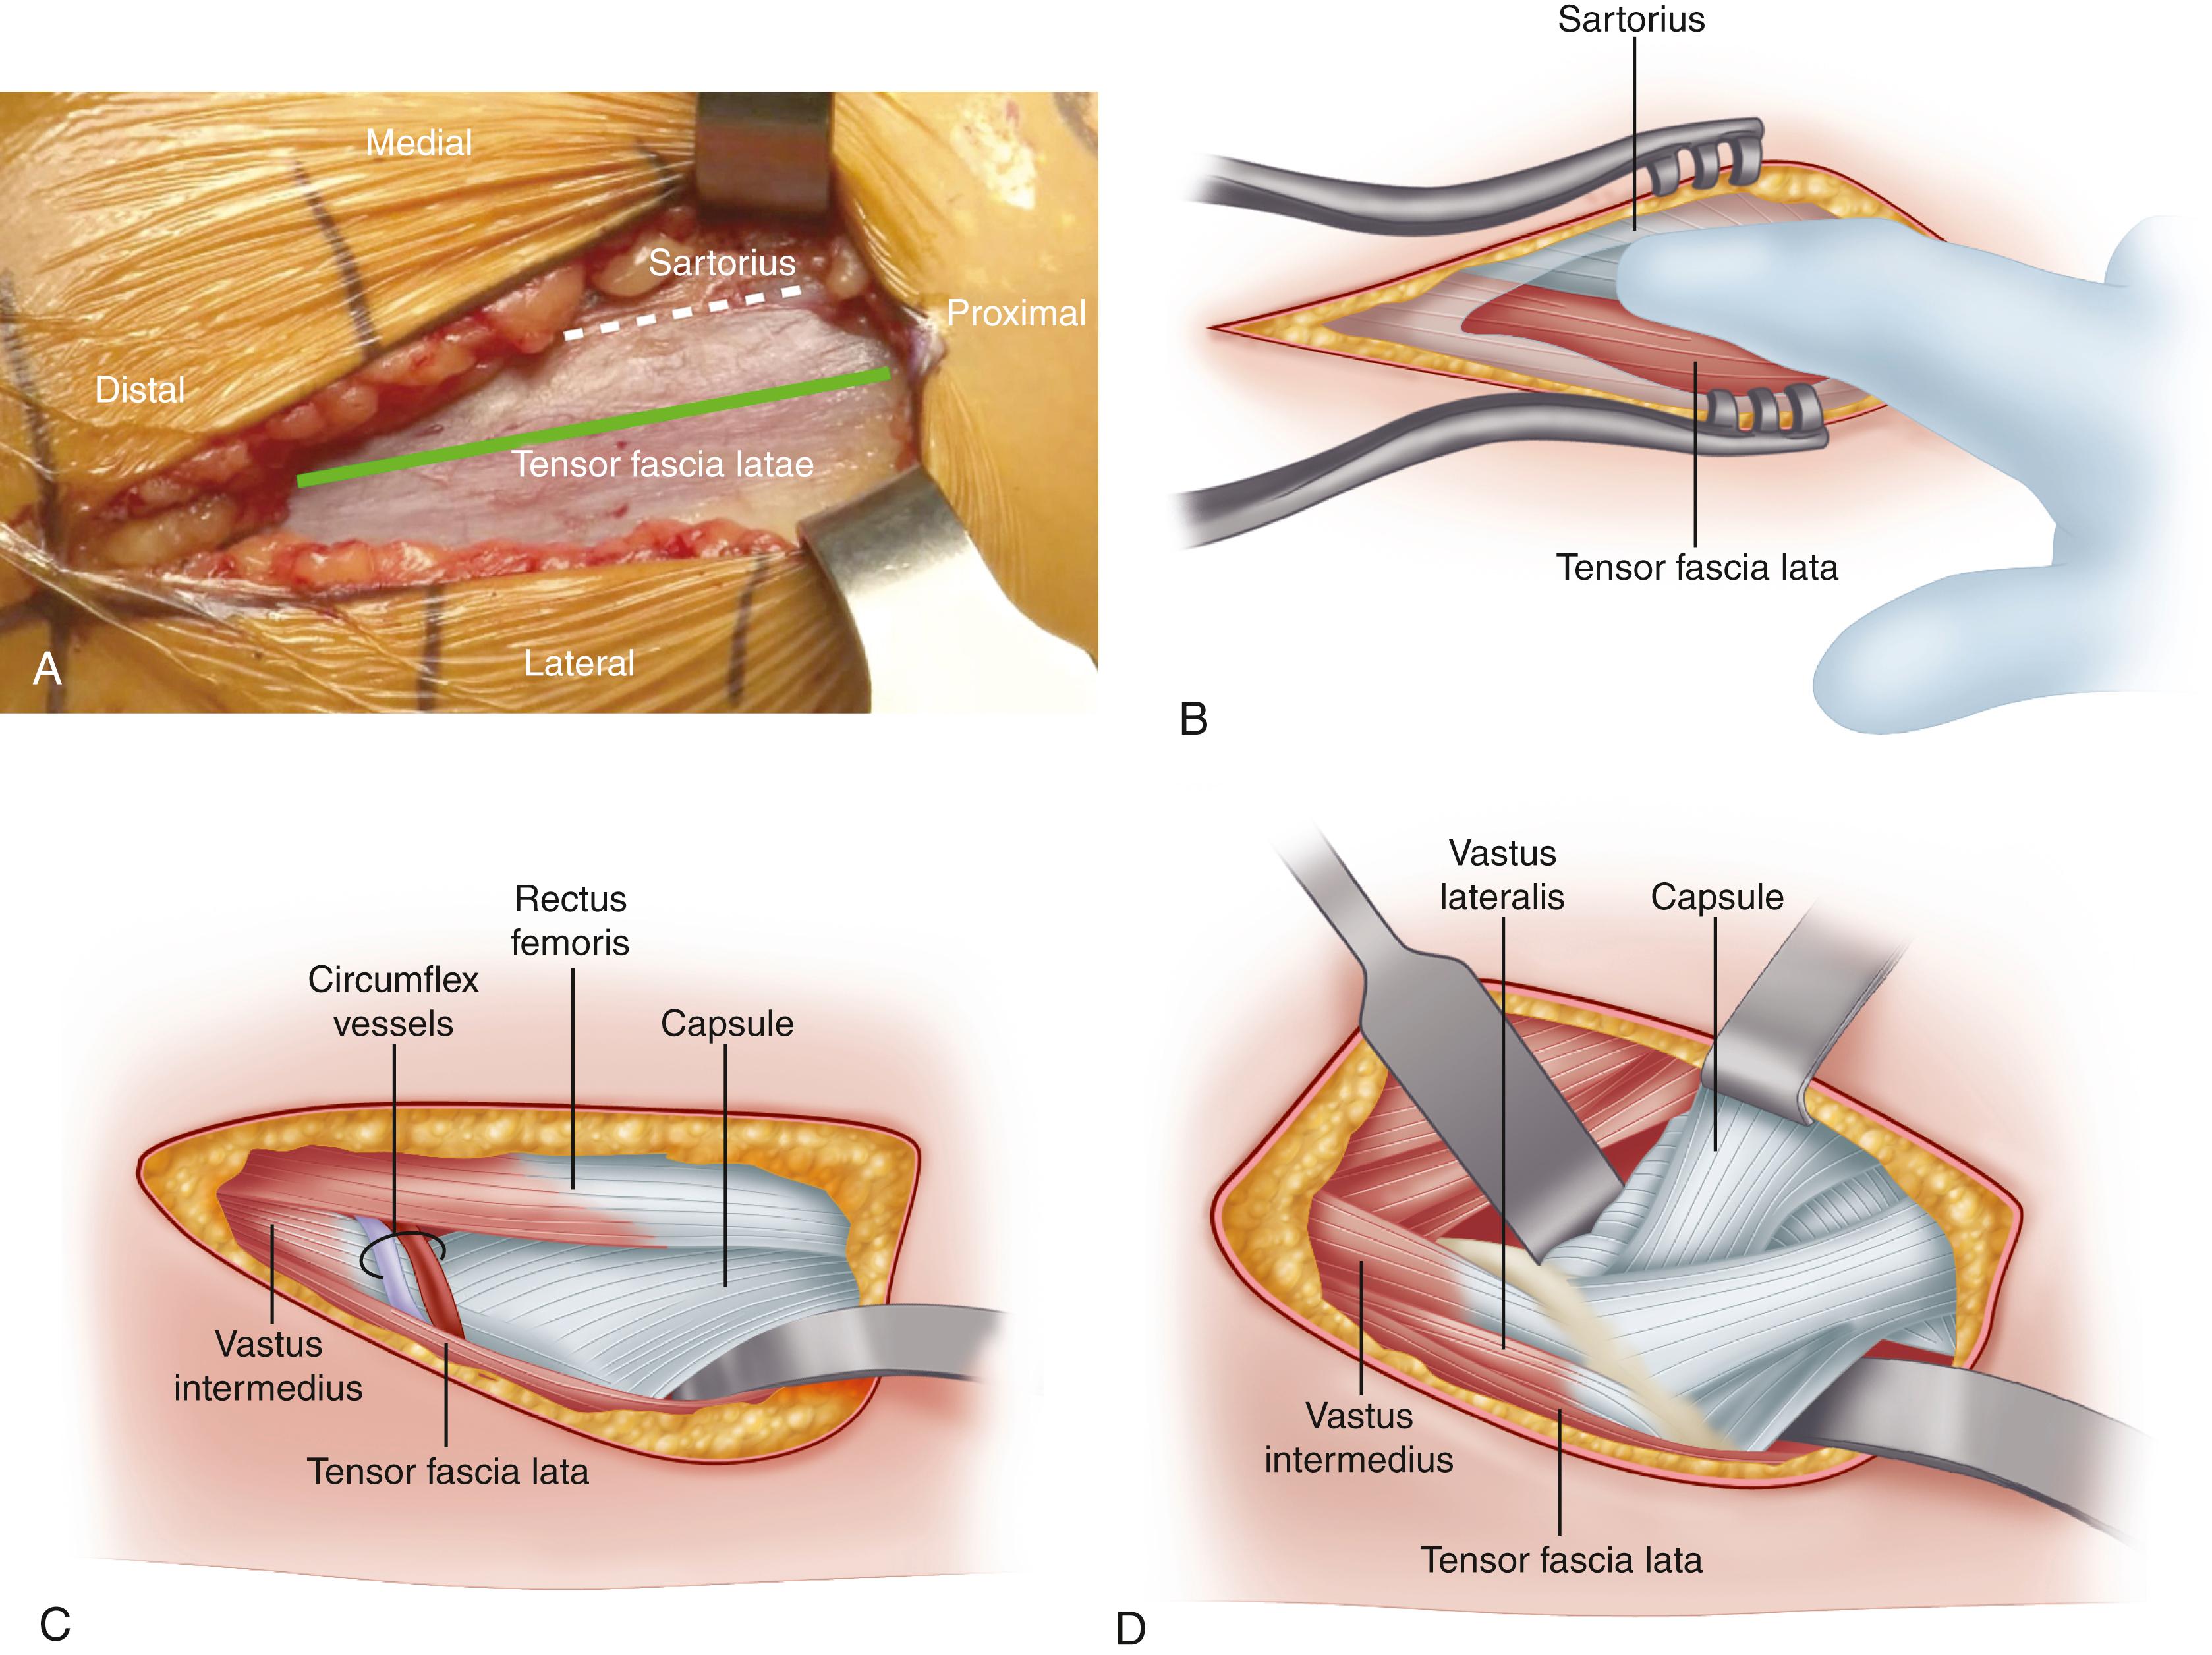 FIGURE 3.62, A , Fascial incision (green line) is positioned over the tensor fascia latae (TFL) muscle and lateral to the interval between TFL and sartorius (dashed white line) . B , Blunt dissection medially beneath fascia leads to interval between TFL and sartorius. C , Within the fat layer at distal extent of interval are branches of the lateral femoral circumflex vessels that must be identified and carefully cauterized. D , Extracapsular placement of retractors superiorly and inferiorly before capsulotomy. An additional retractor may be placed medially beneath rectus femoris. ( A from Post ZD, Orozco F, Diaz-Ledezma C, et al: Direct anterior approach for total hip arthroplasty: indications, technique, and results, J Am Acad Orthop Surg 22:595-603, 2014. B-D redrawn from Depuy.) SEE TECHNIQUE 3.7.